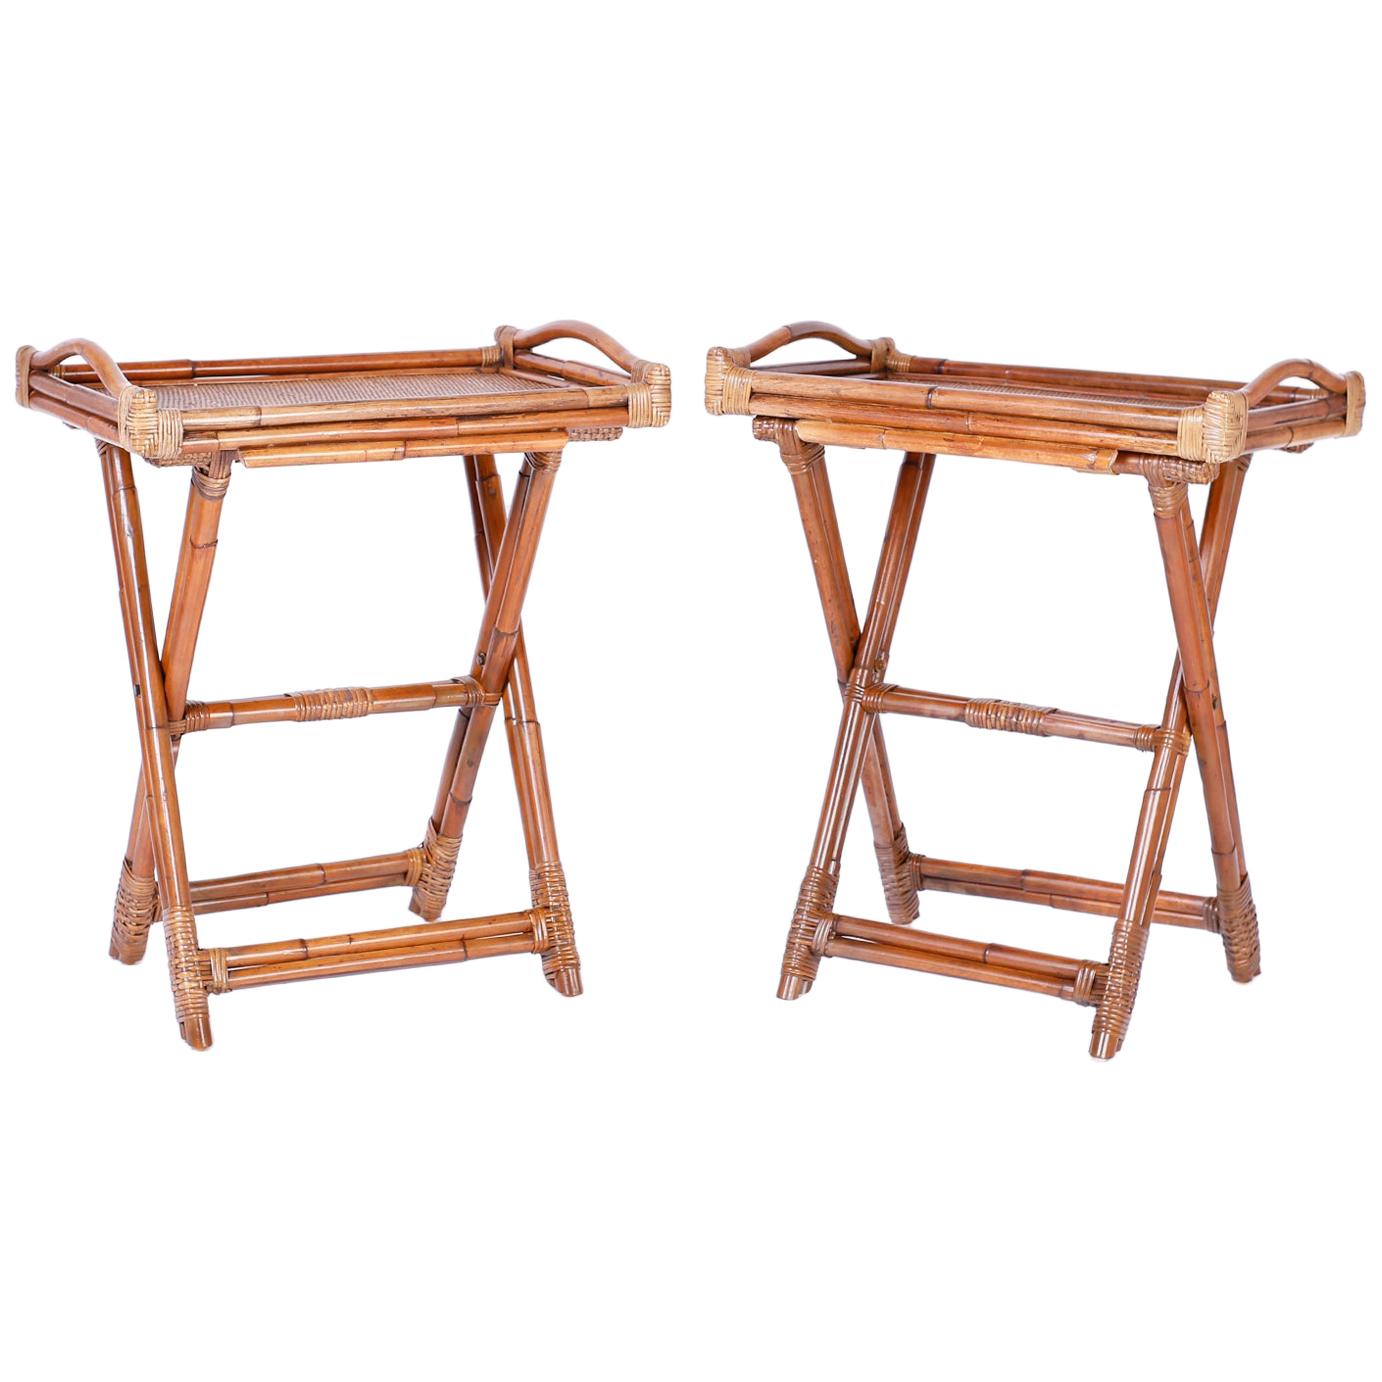 Pair of Bamboo and Grasscloth Trays on Stands